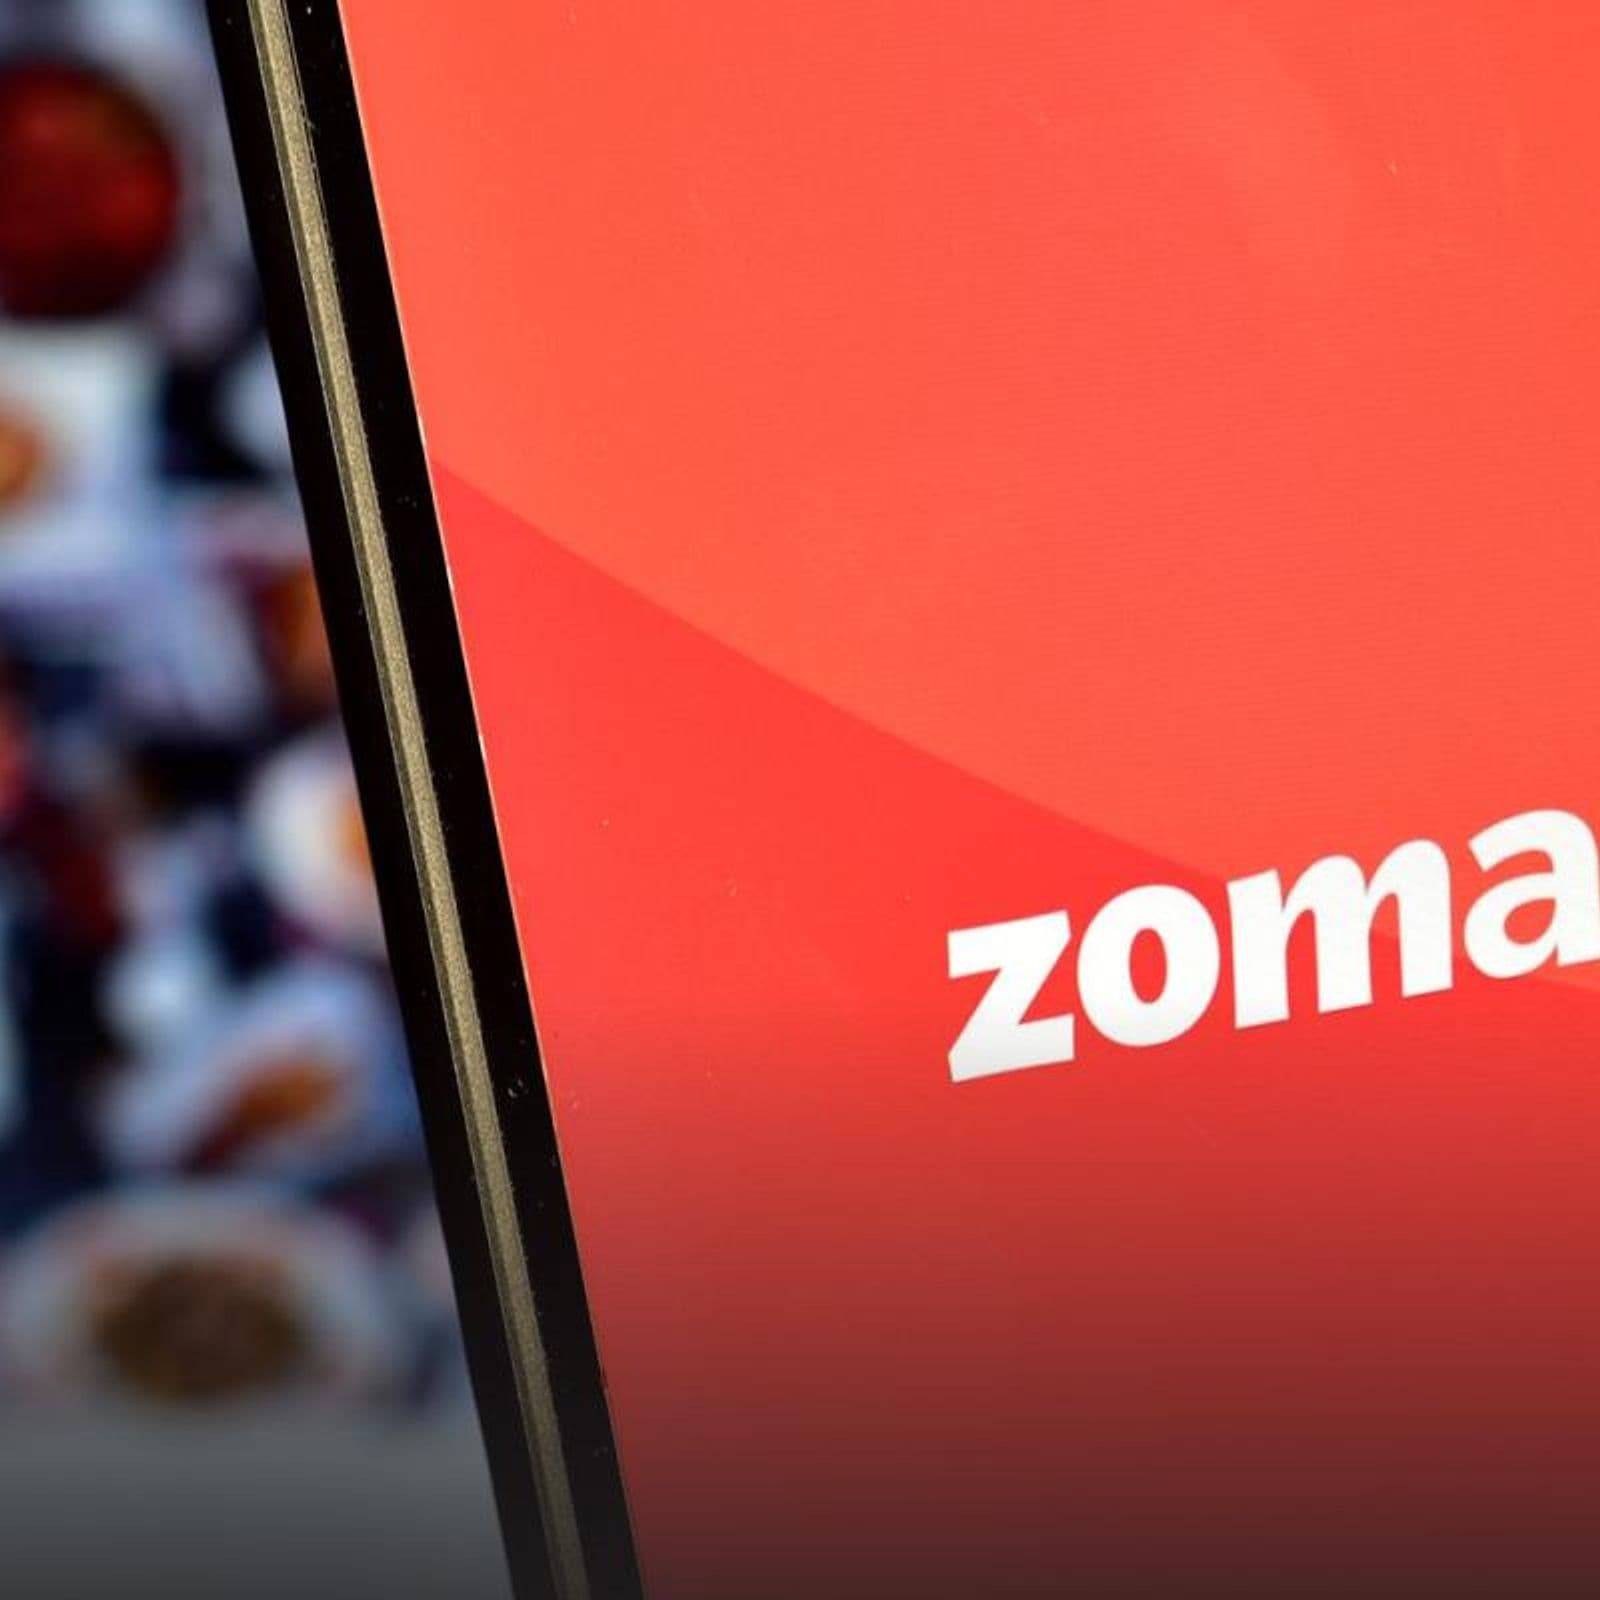 Zomato rounds up FY24 with Rs 351 Cr net profit; Blinkit breaks even in Q4